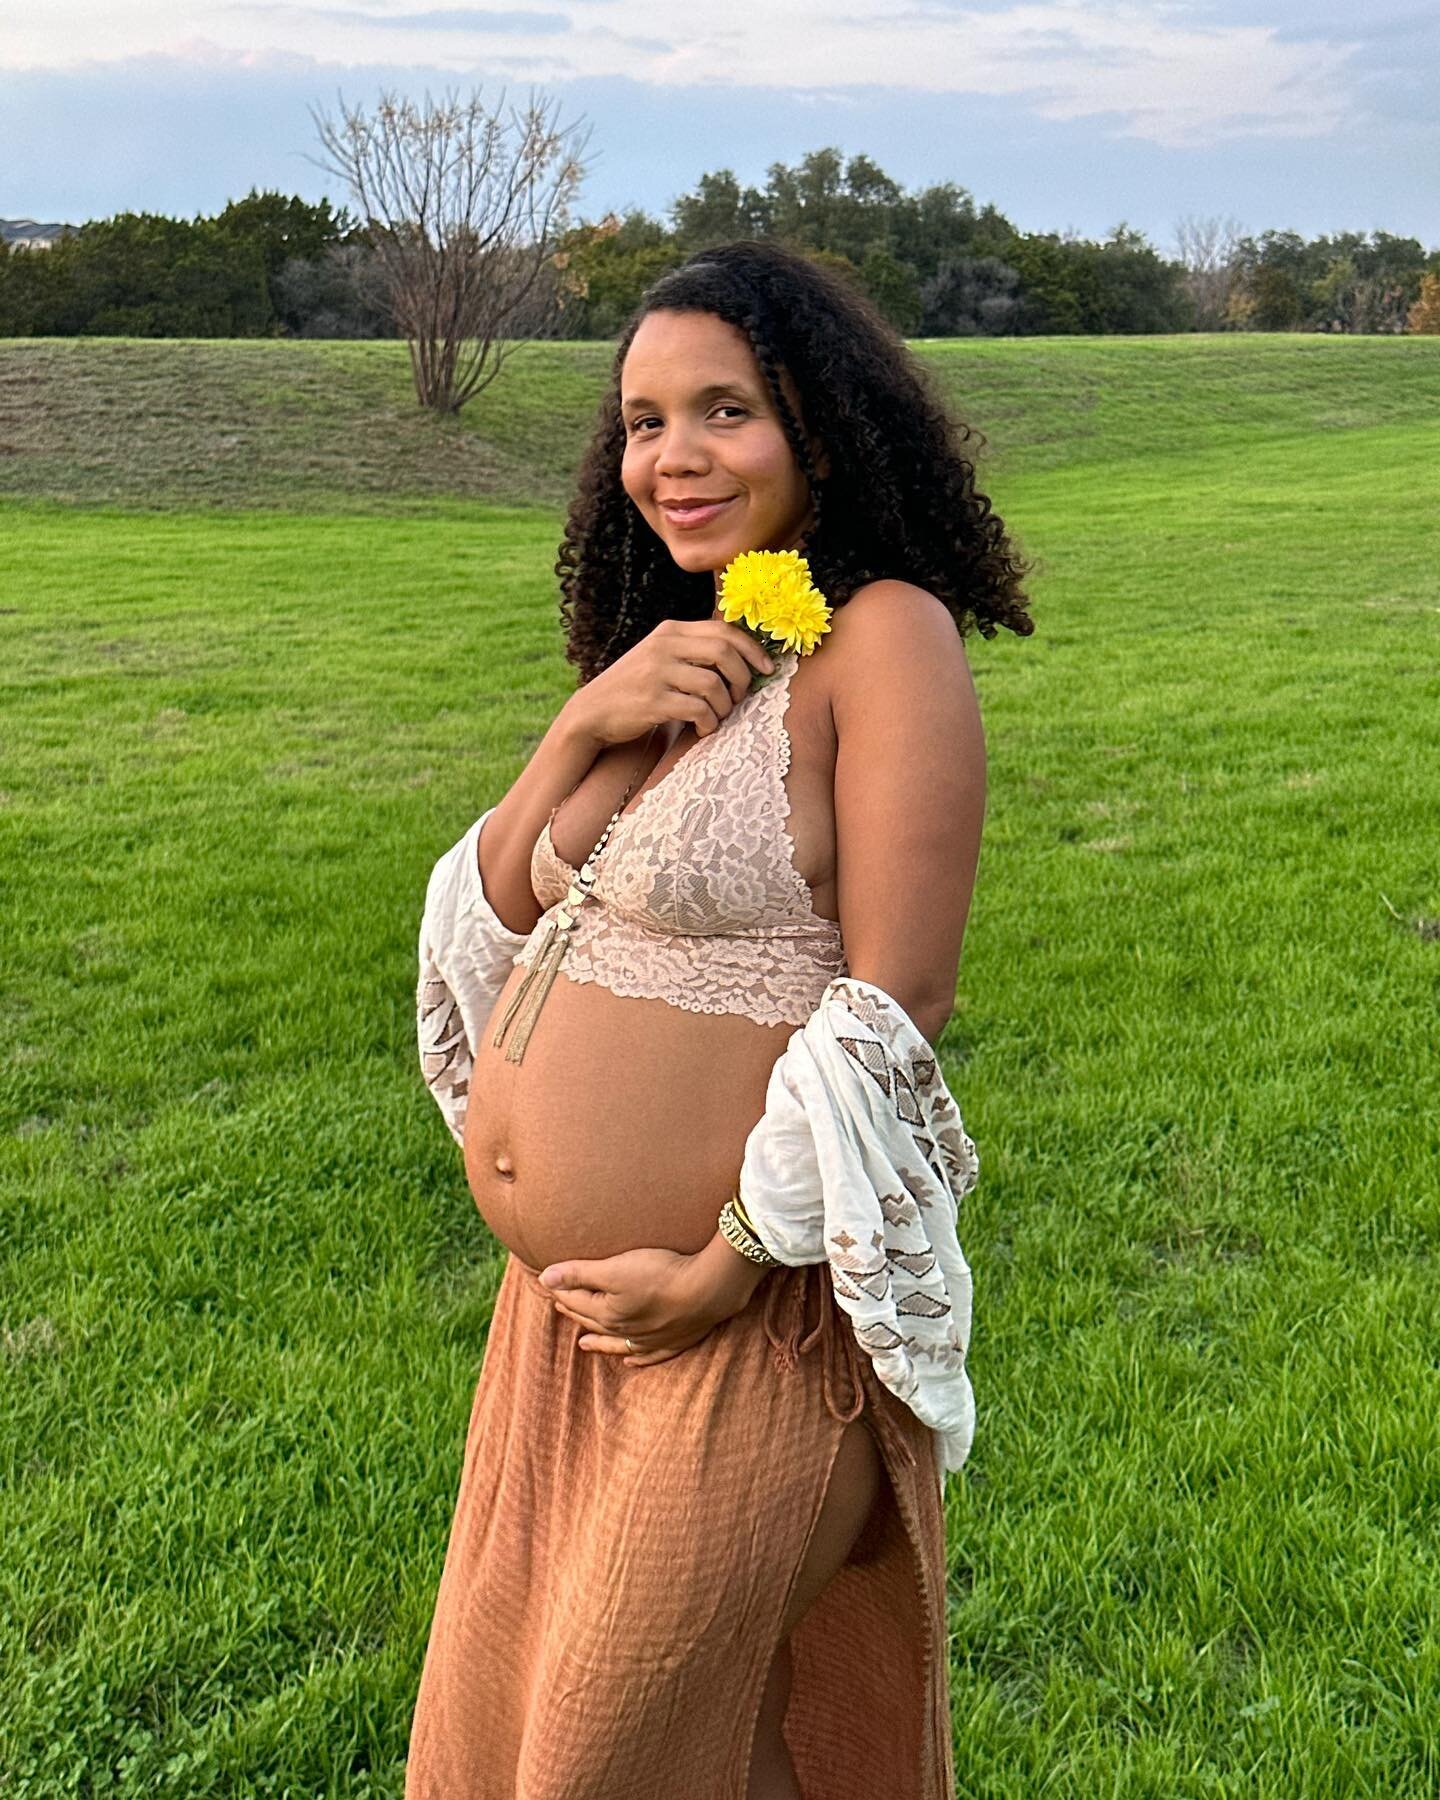 Our third sacred soul child is arriving this spring! 🌼💕

We have been blessed with the gift to grow our family and we are so grateful.

I love being pregnant, I love giving birth, I Iove being a mama 

#davanamama #22weeks #surrenderandtrust #grati